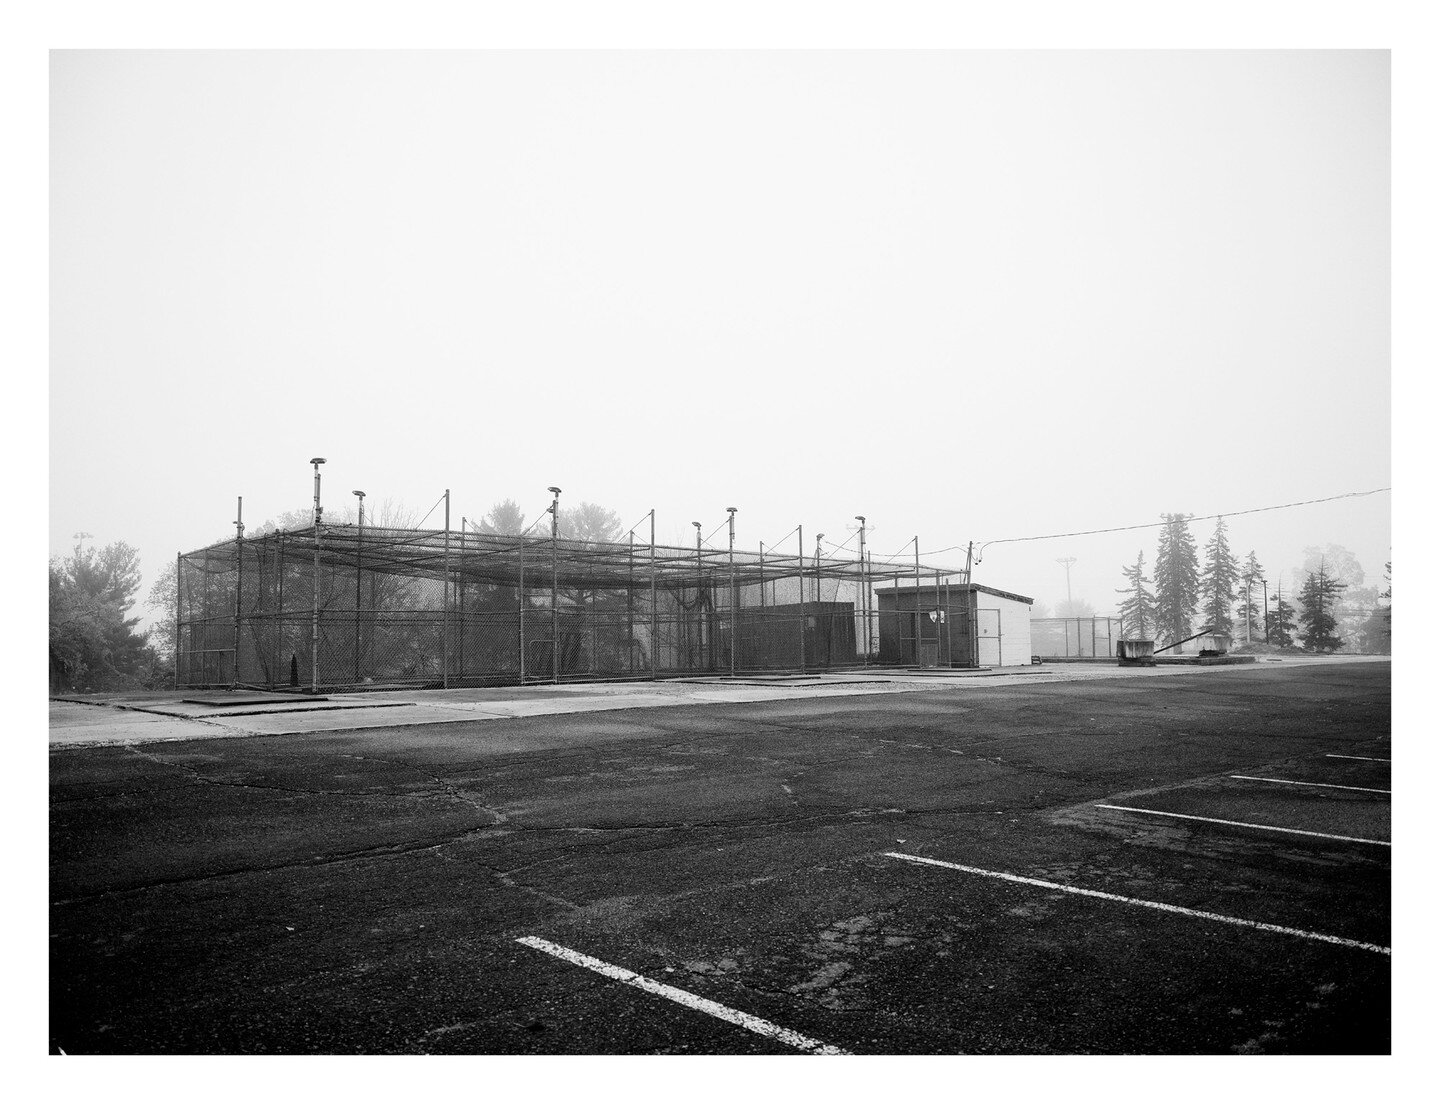 Former Nike anti-ballistic missile base PH07, now covered in little league batting cages.